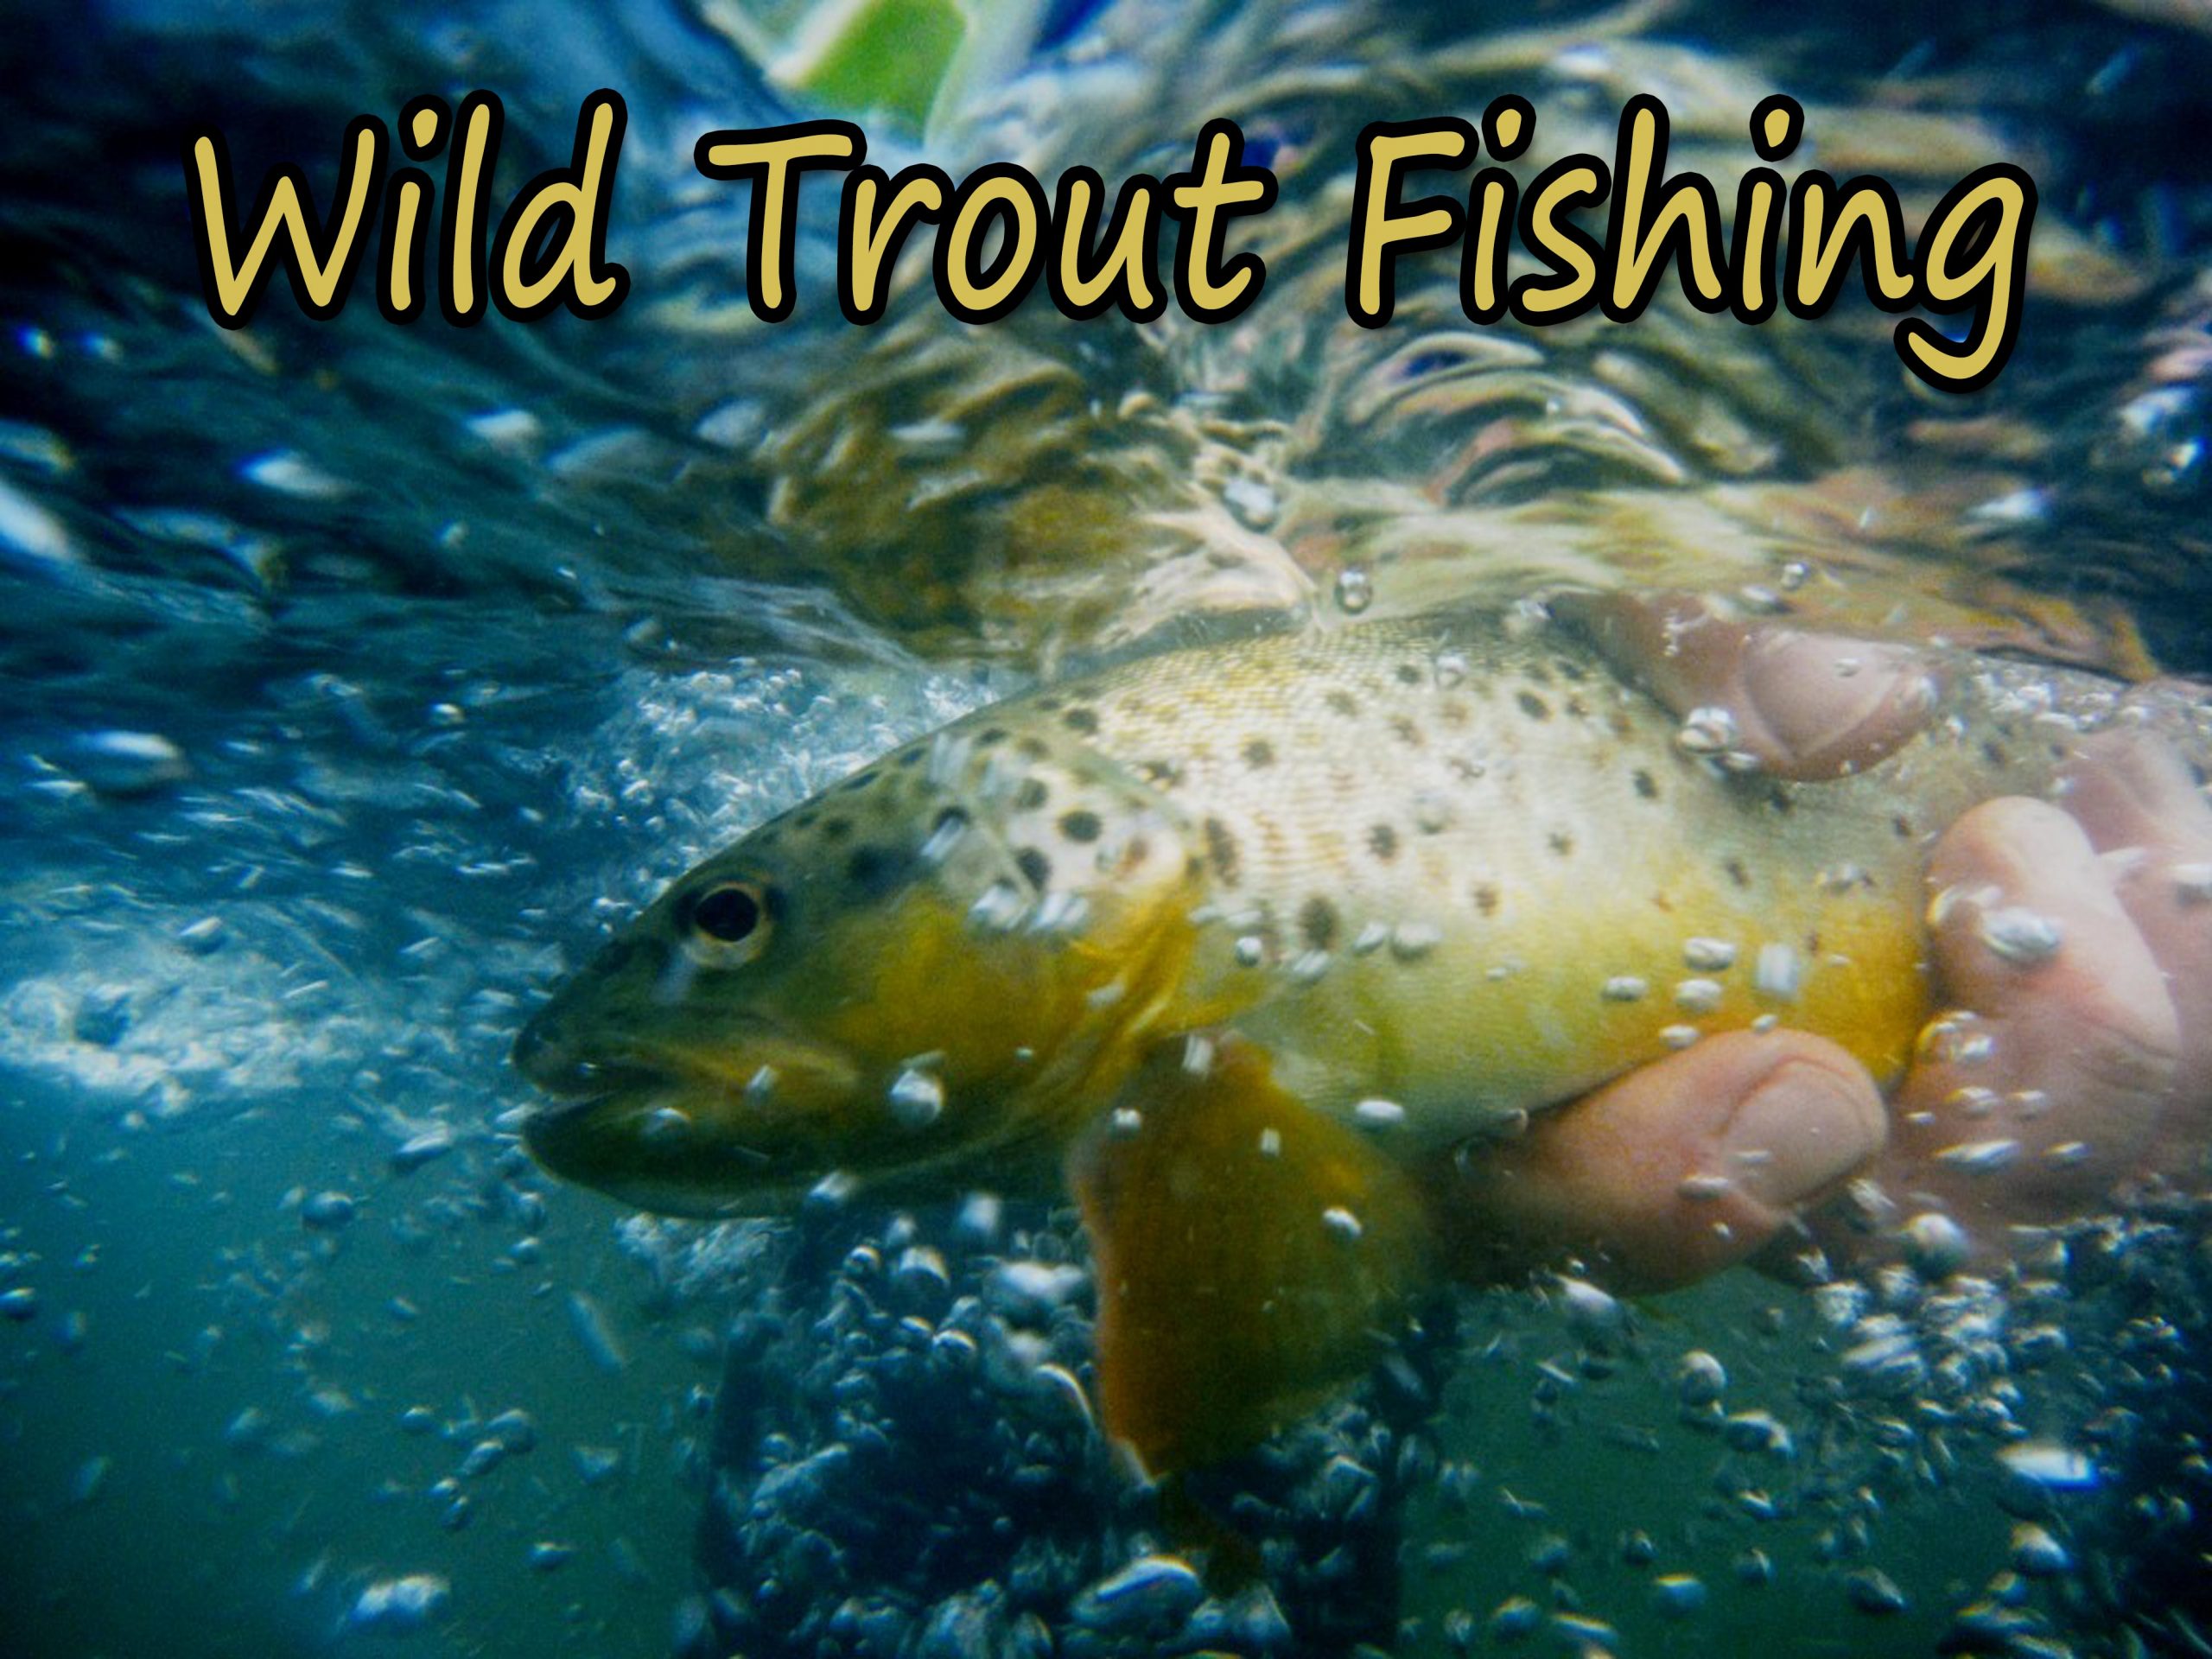 Ask Us About Our Native Brook Trout And Wild Brown Trout Fly Fishing Trips. Enjoy A Day Out Or An Overnight Packaged Trip